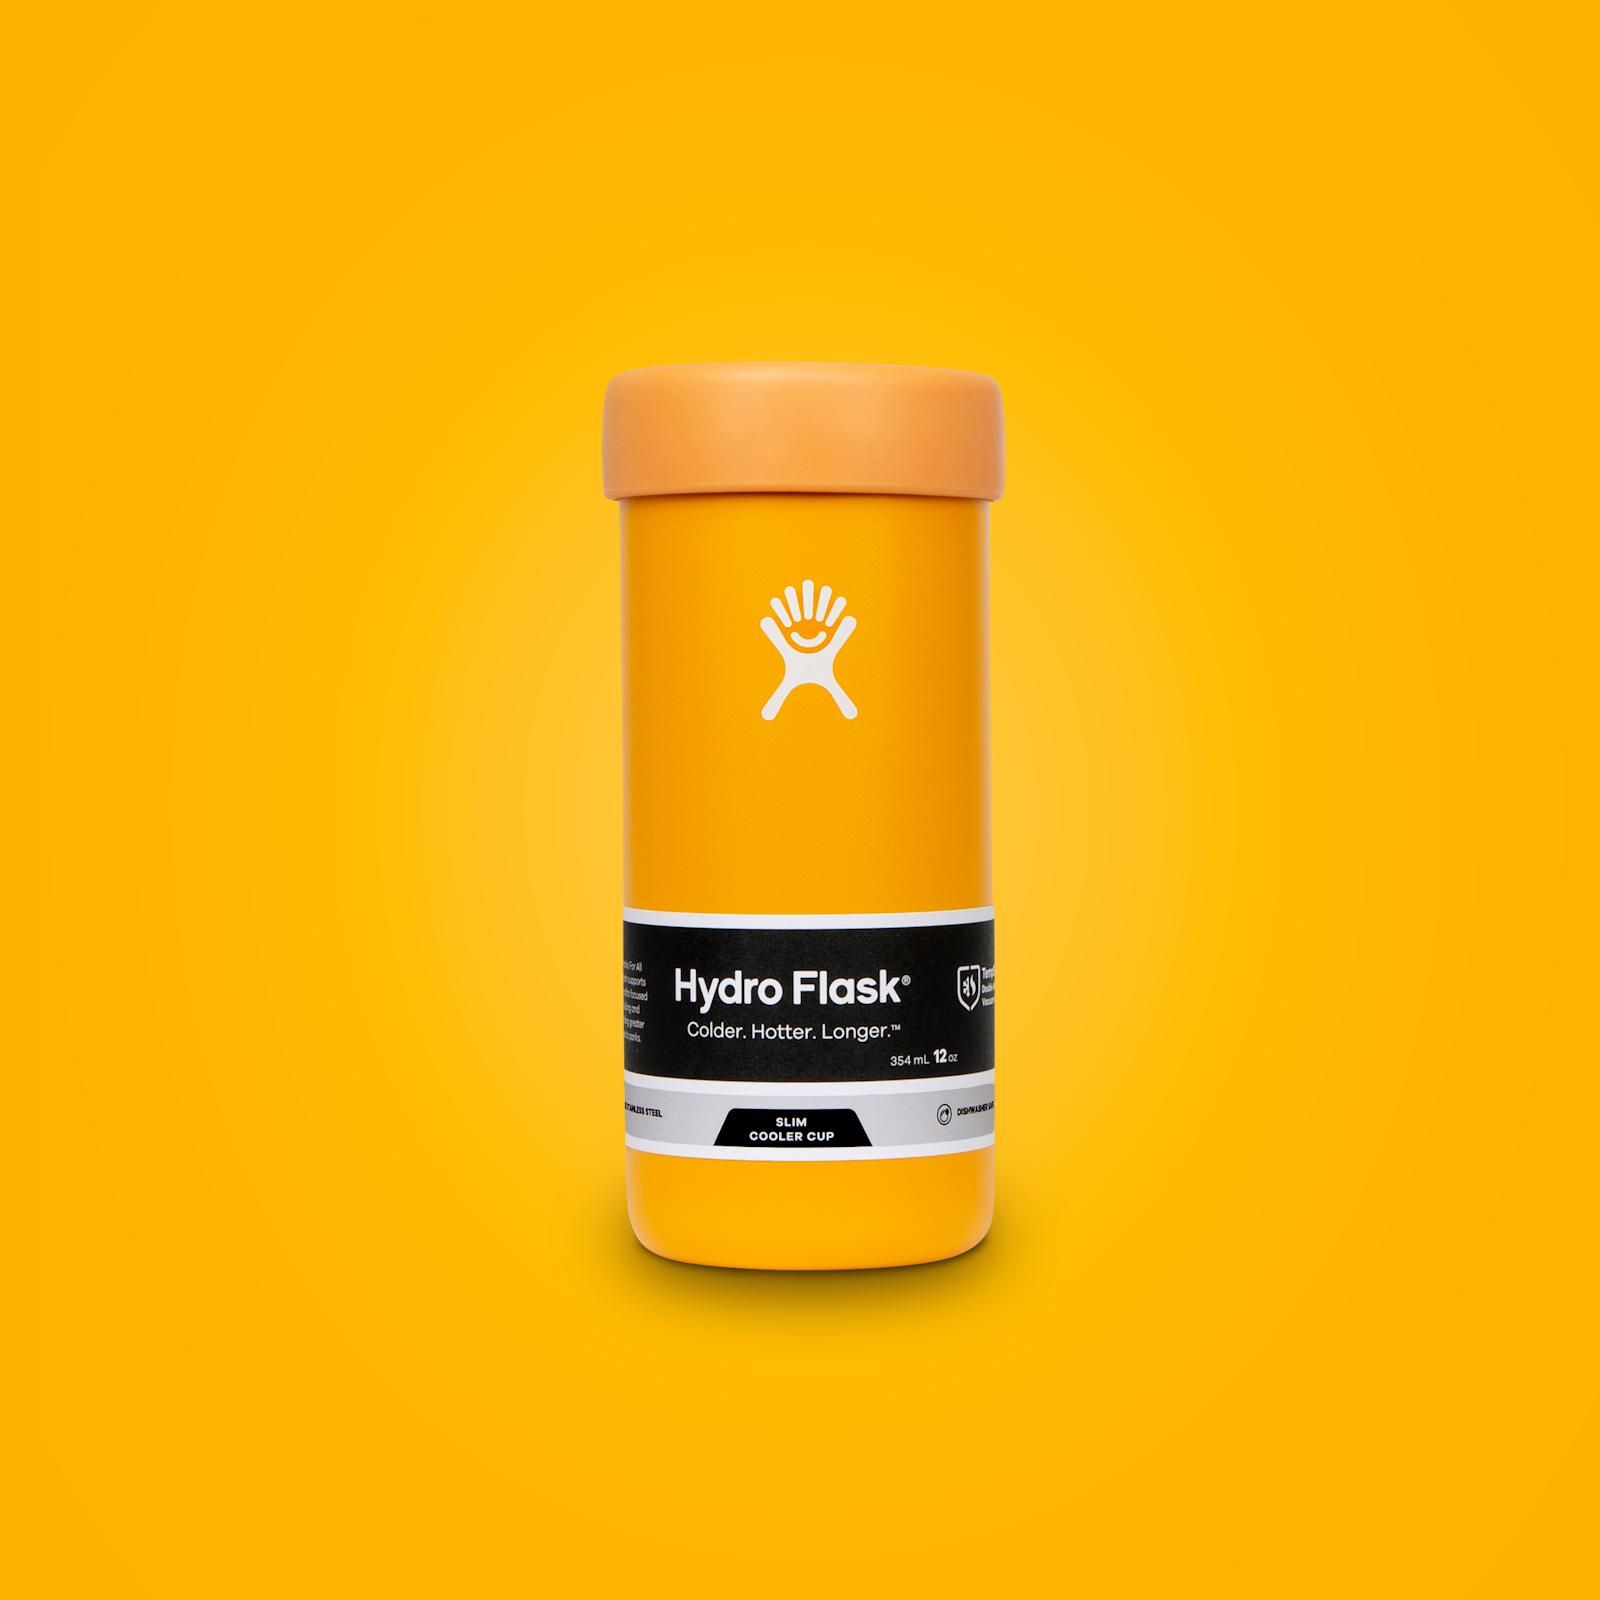 A Hydro Flask brand design yellow Tumbler Slim Cooler on yellow background.